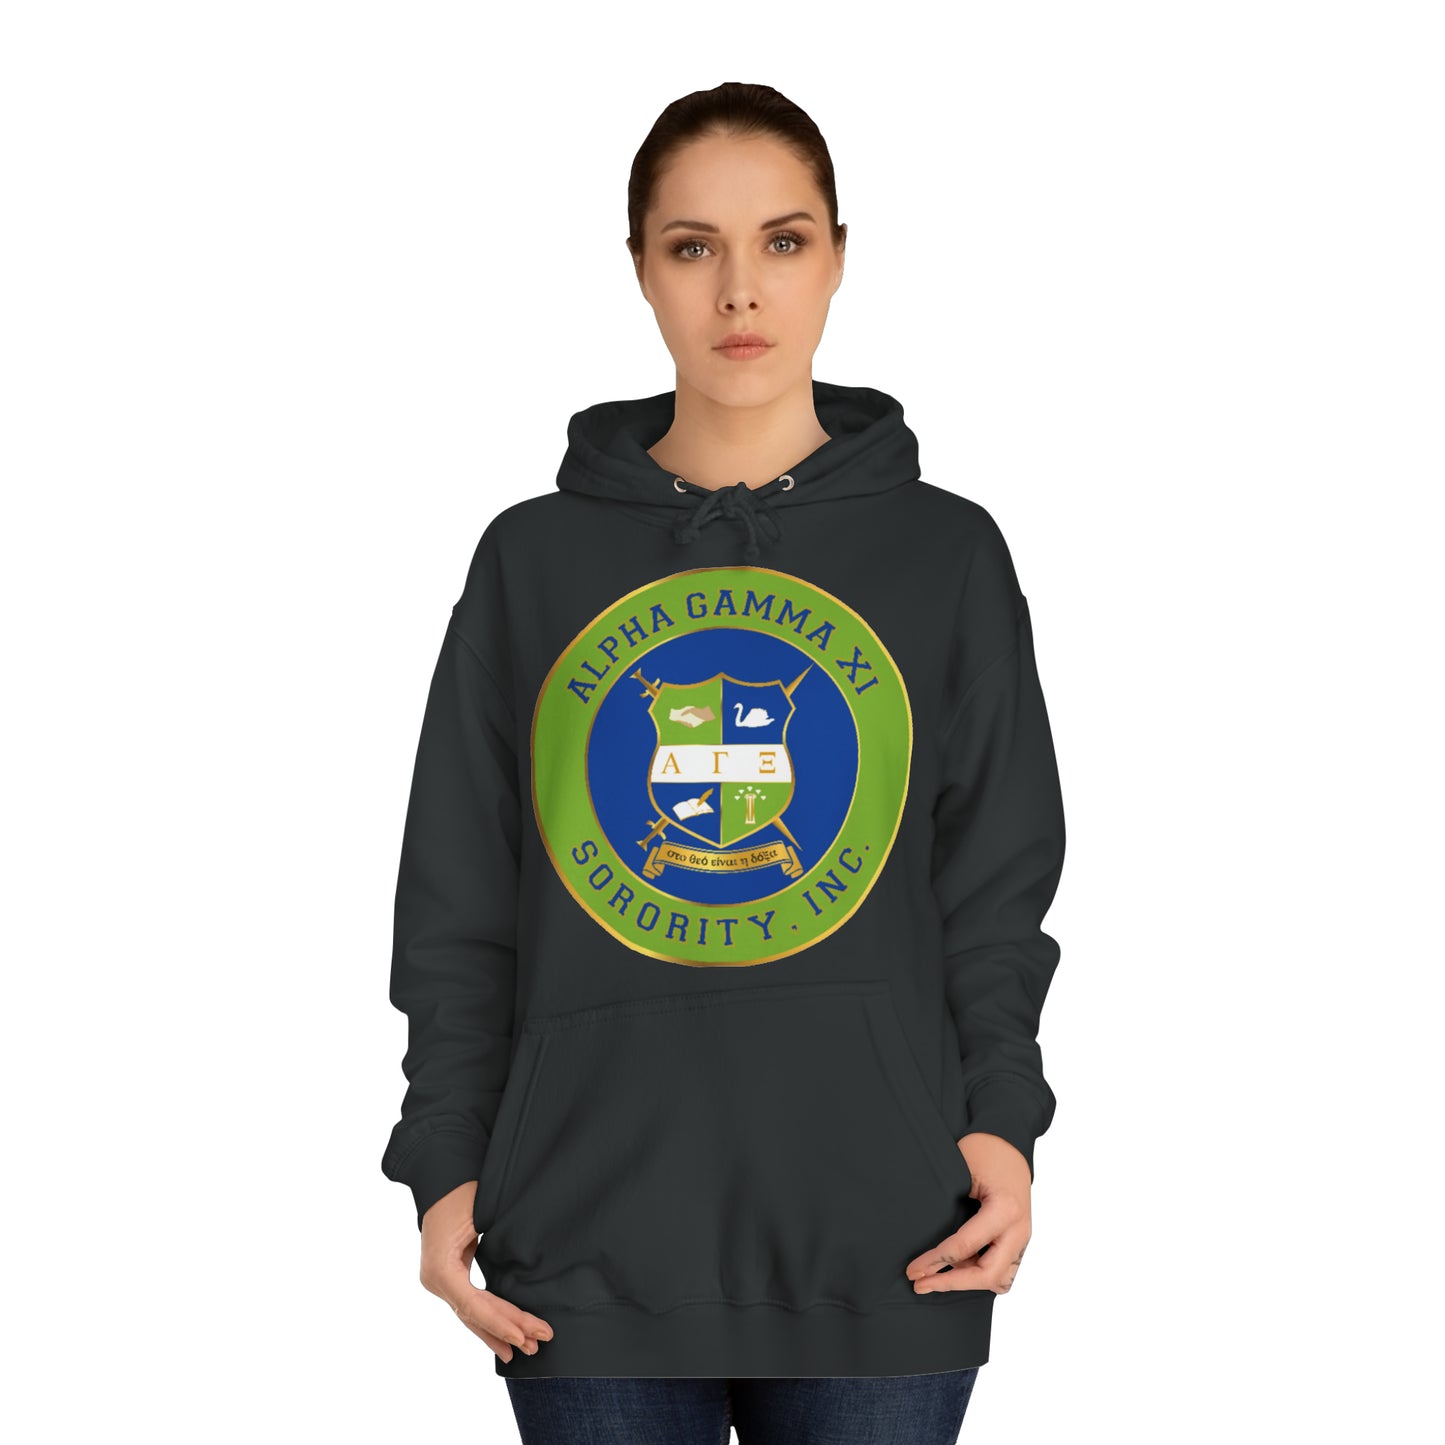 AGXi Unisex College Hoodie